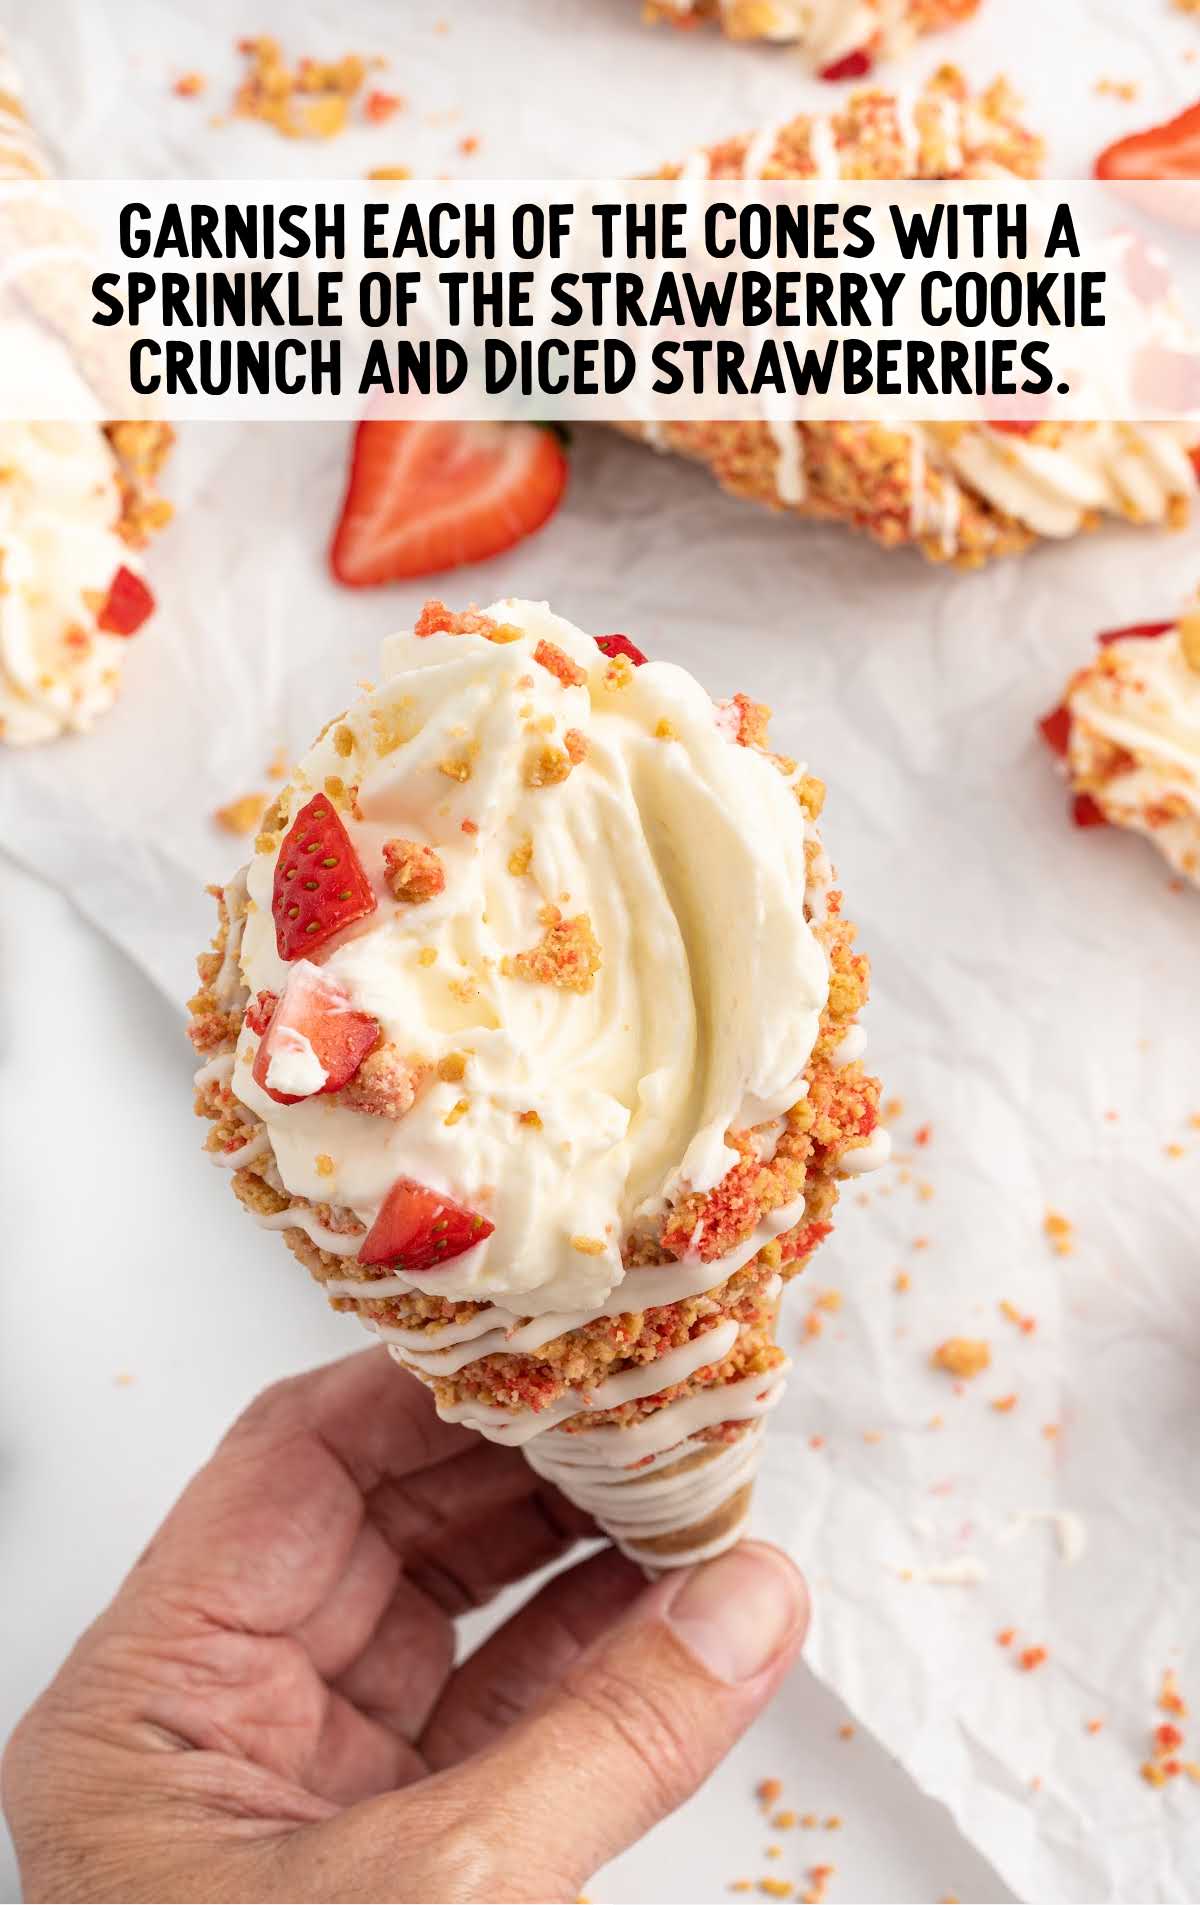 Strawberry Crunch Cheesecake Cones sprinkled with the reserved strawberry cookie crunch and a few freshly chopped strawberries